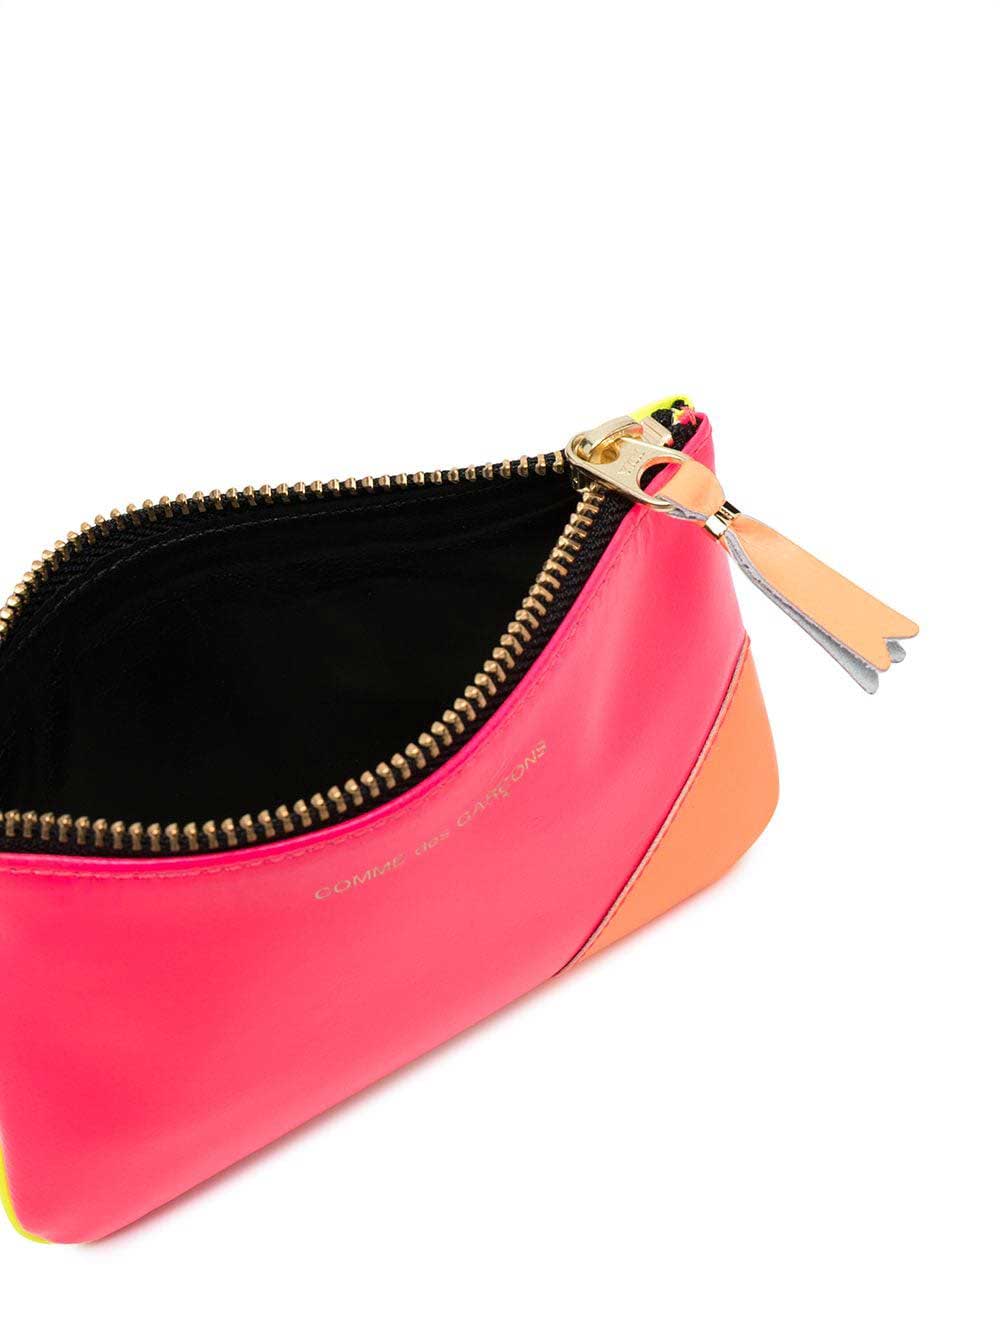 Mini Purse In Leather With Super Fluo Zip